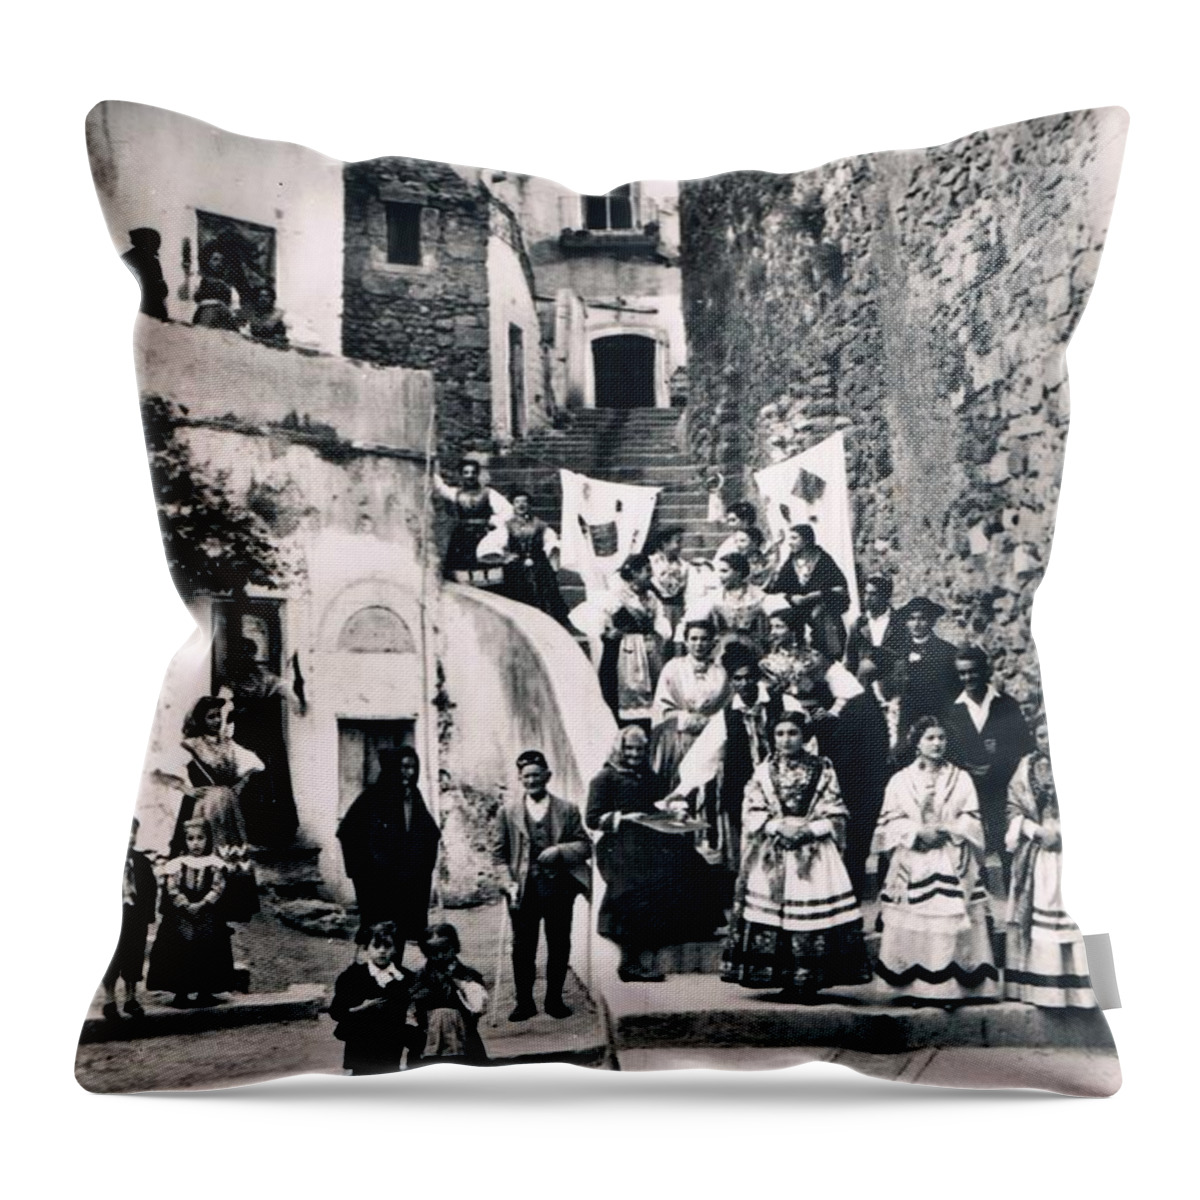 Folklore Throw Pillow featuring the photograph Group by Archangelus Gallery